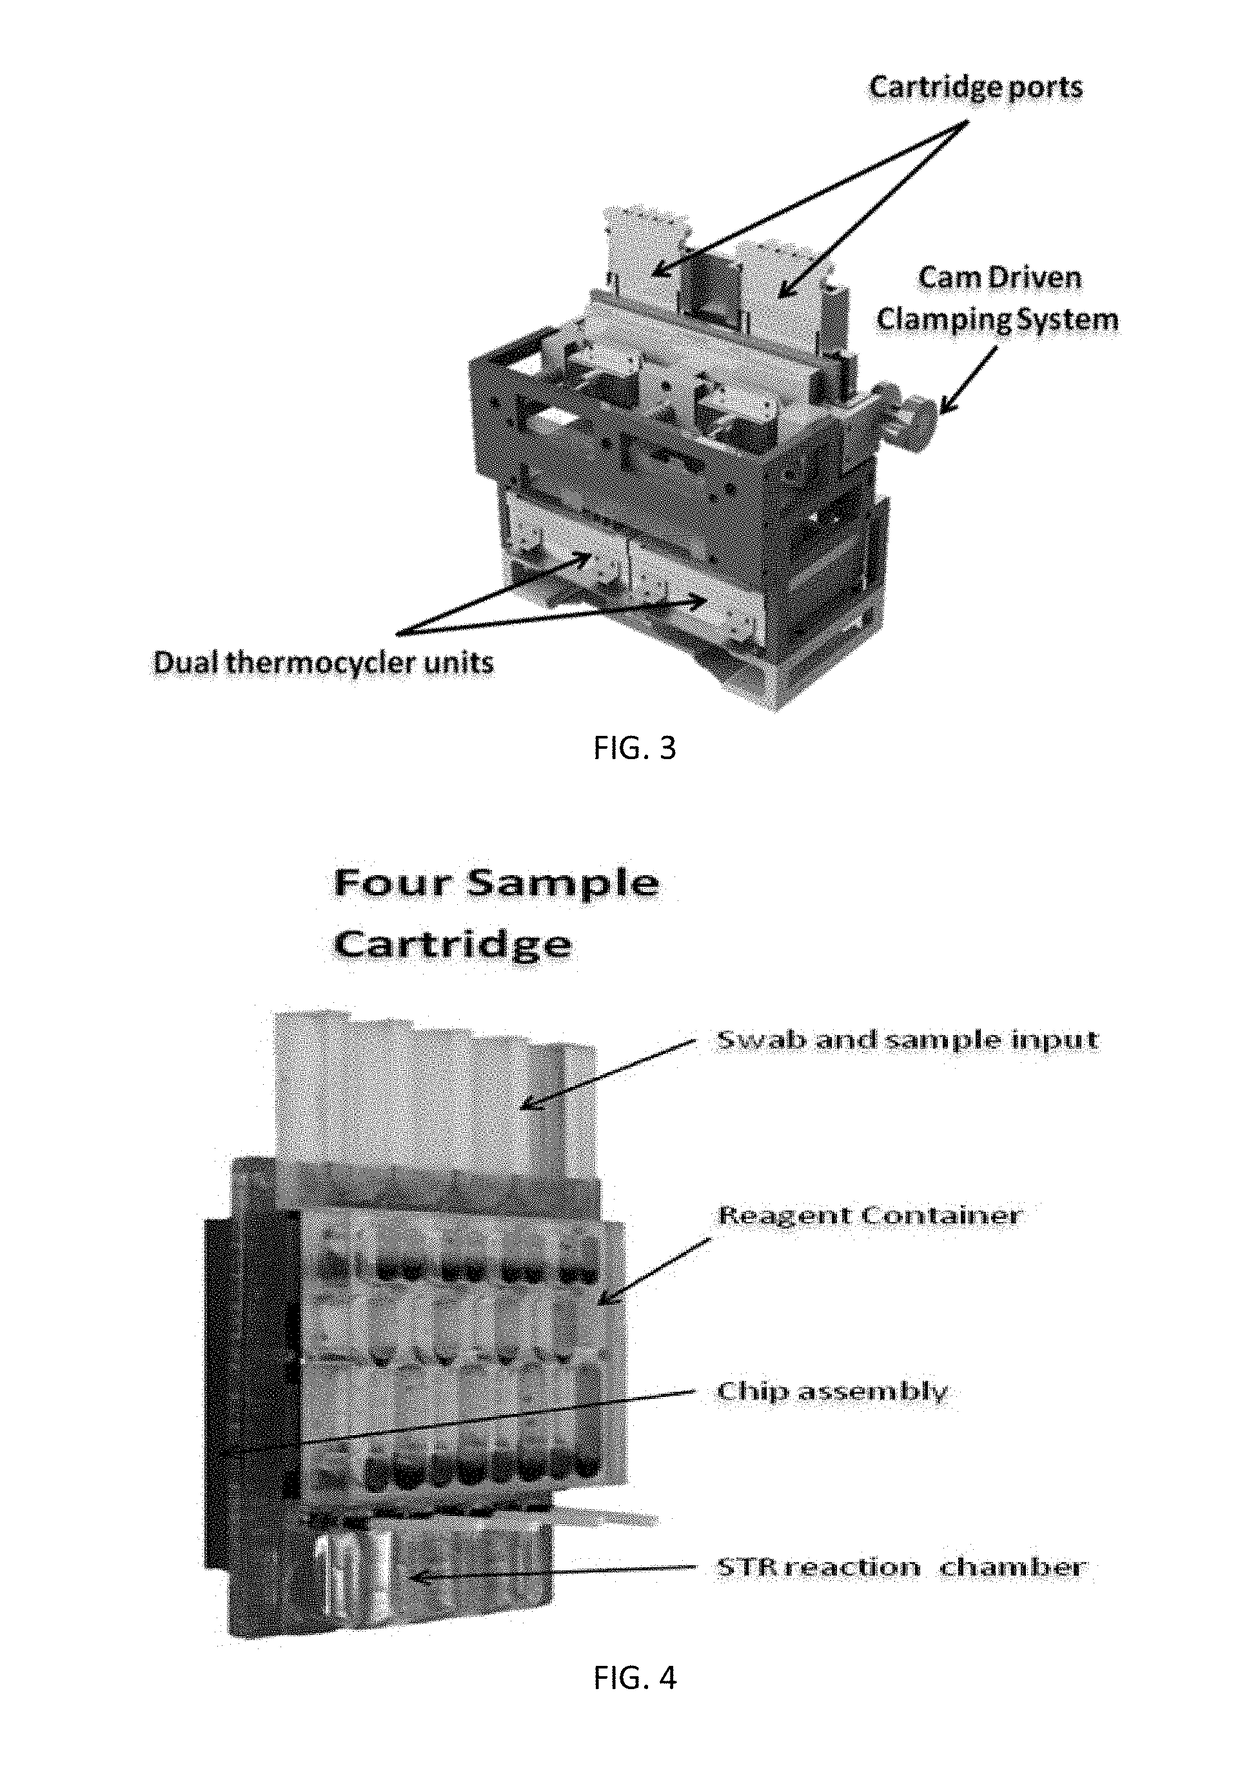 Sample preparation, processing and analysis systems